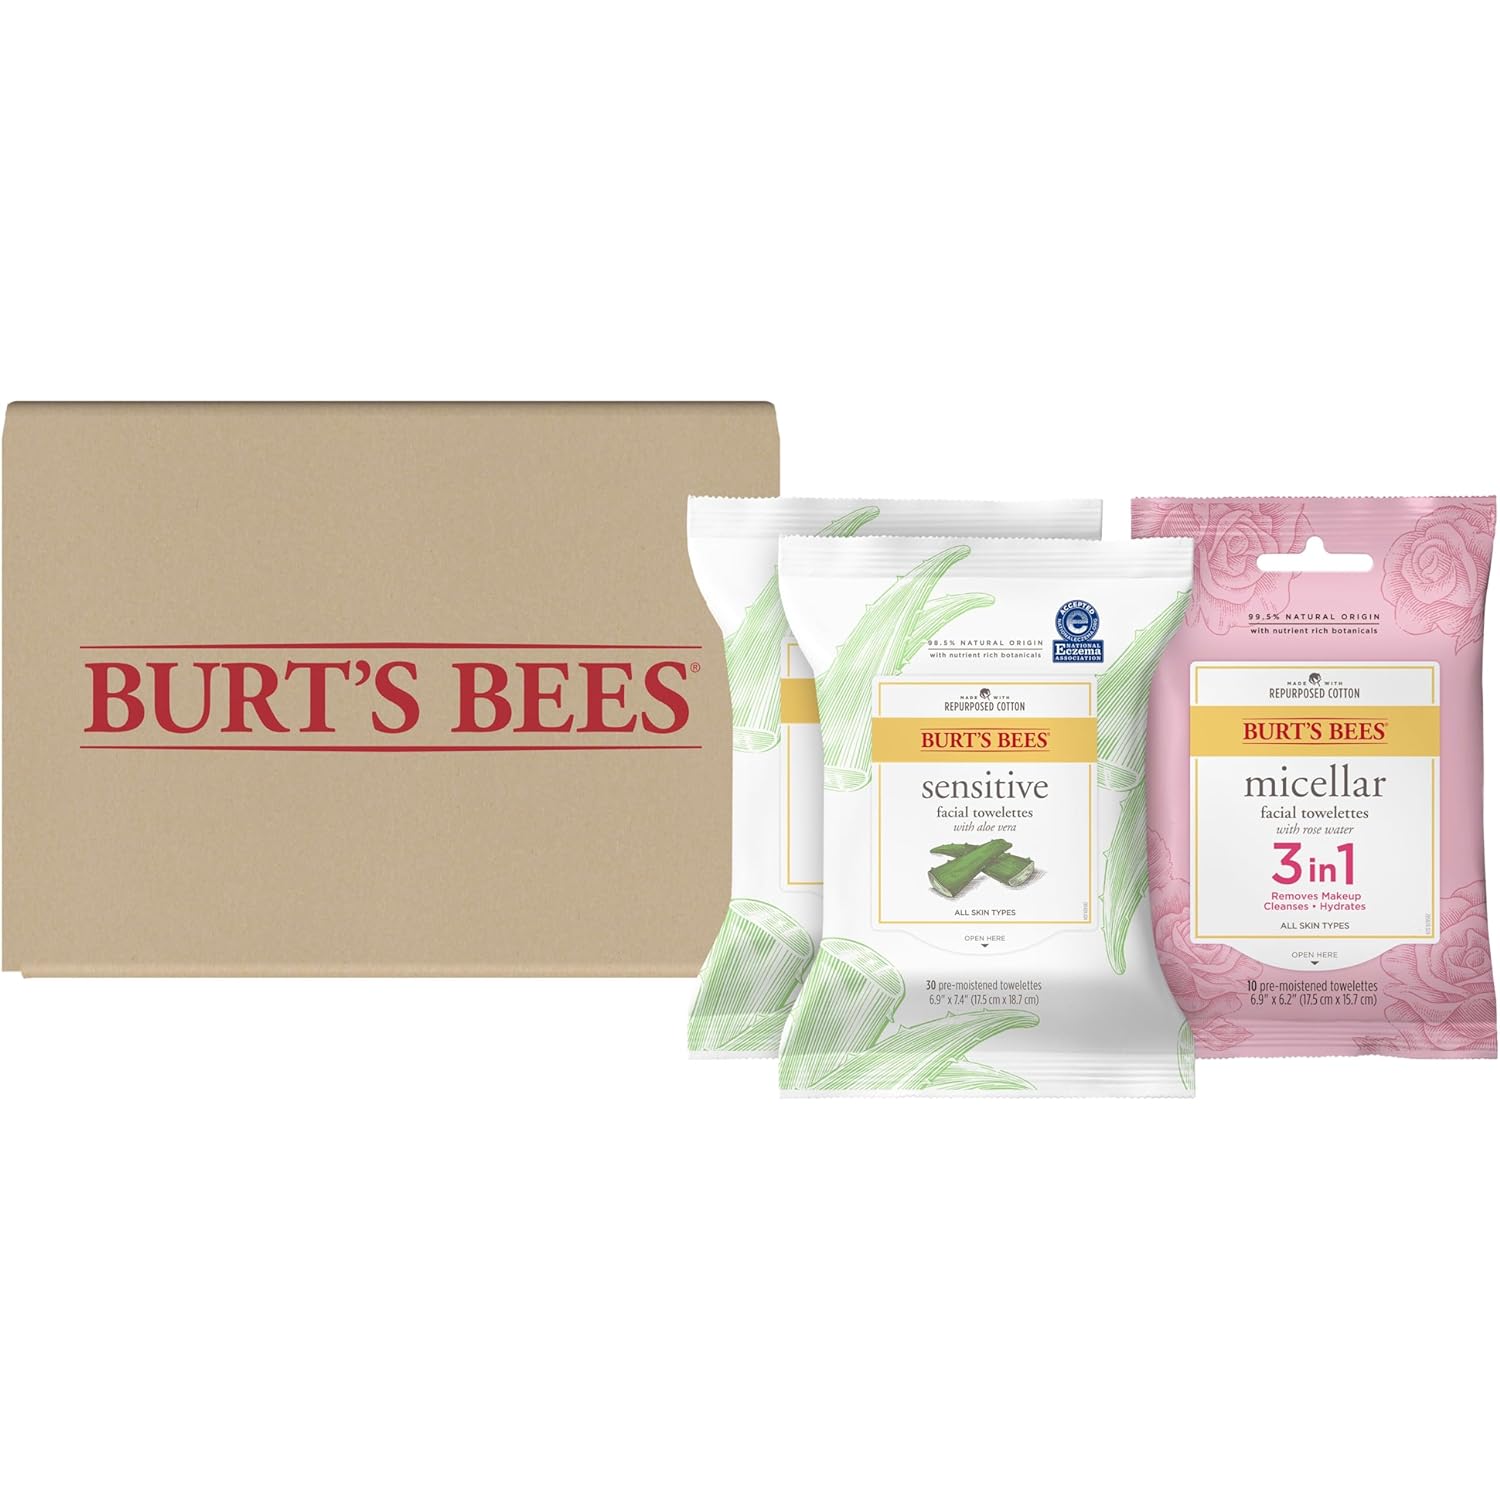 Burt's Bees Sensitive and Micellar Facial Towelettes With Aloe Vera and Rose Water, Pre-Moistened Towelettes for All Skin Types, 98.5/99.5 Percent Natural, 30 ct. Package (2 Pack) and 10 ct. Package